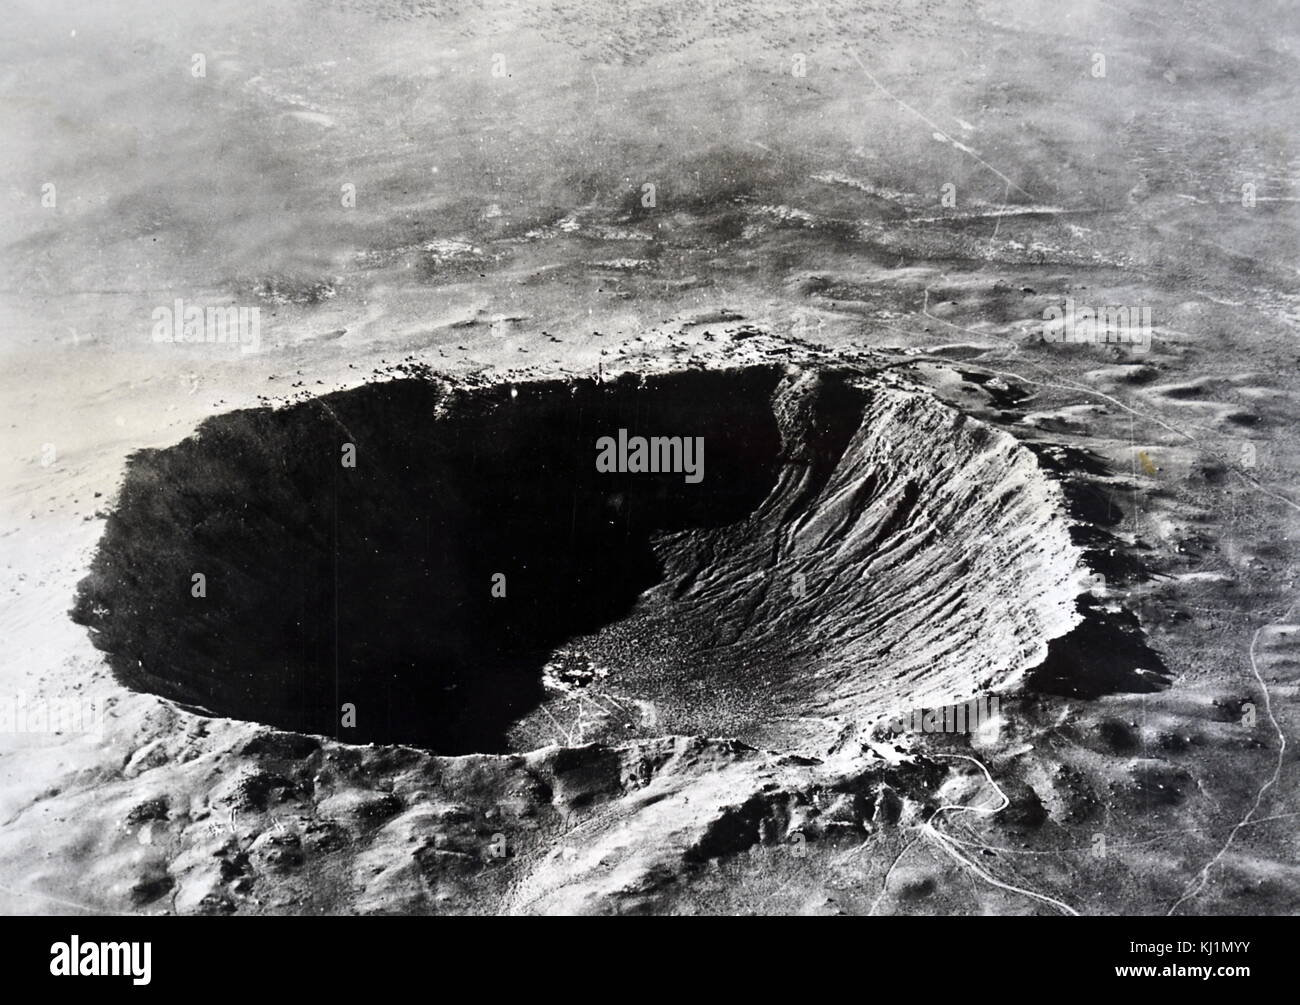 Photograph of the Arizona meteor crater. Meteor Crater is a meteorite impact crater approximately 37 miles (60 km) east of Flagstaff and 18 miles (29 km) west of Winslow in the northern Arizona desert of the United States. Dated 20th Century Stock Photo